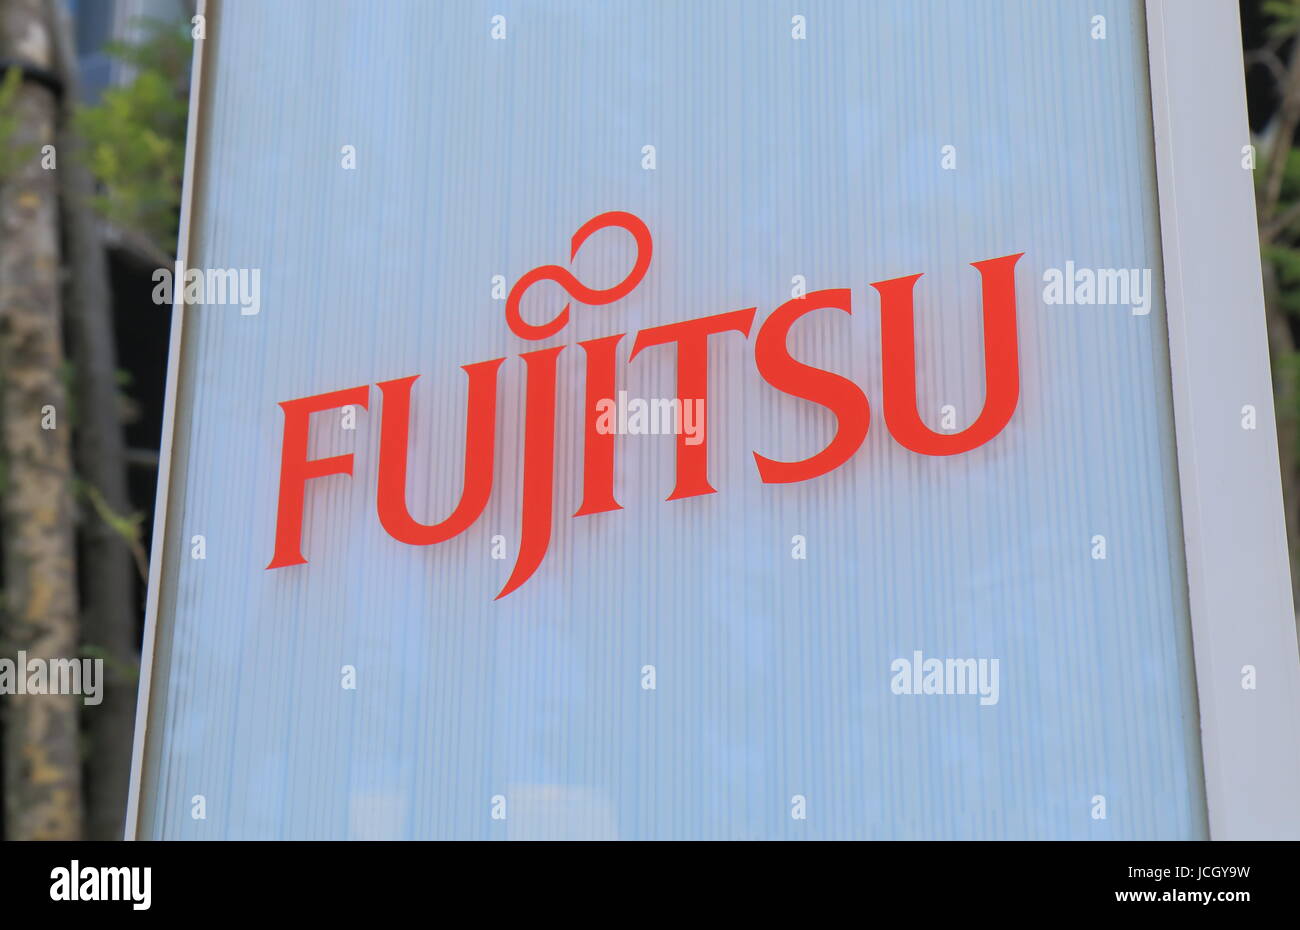 Fujitus. Fujitu is a Japanese multinational information technology equipment and services company headquartered in Tokyo Japan. Stock Photo